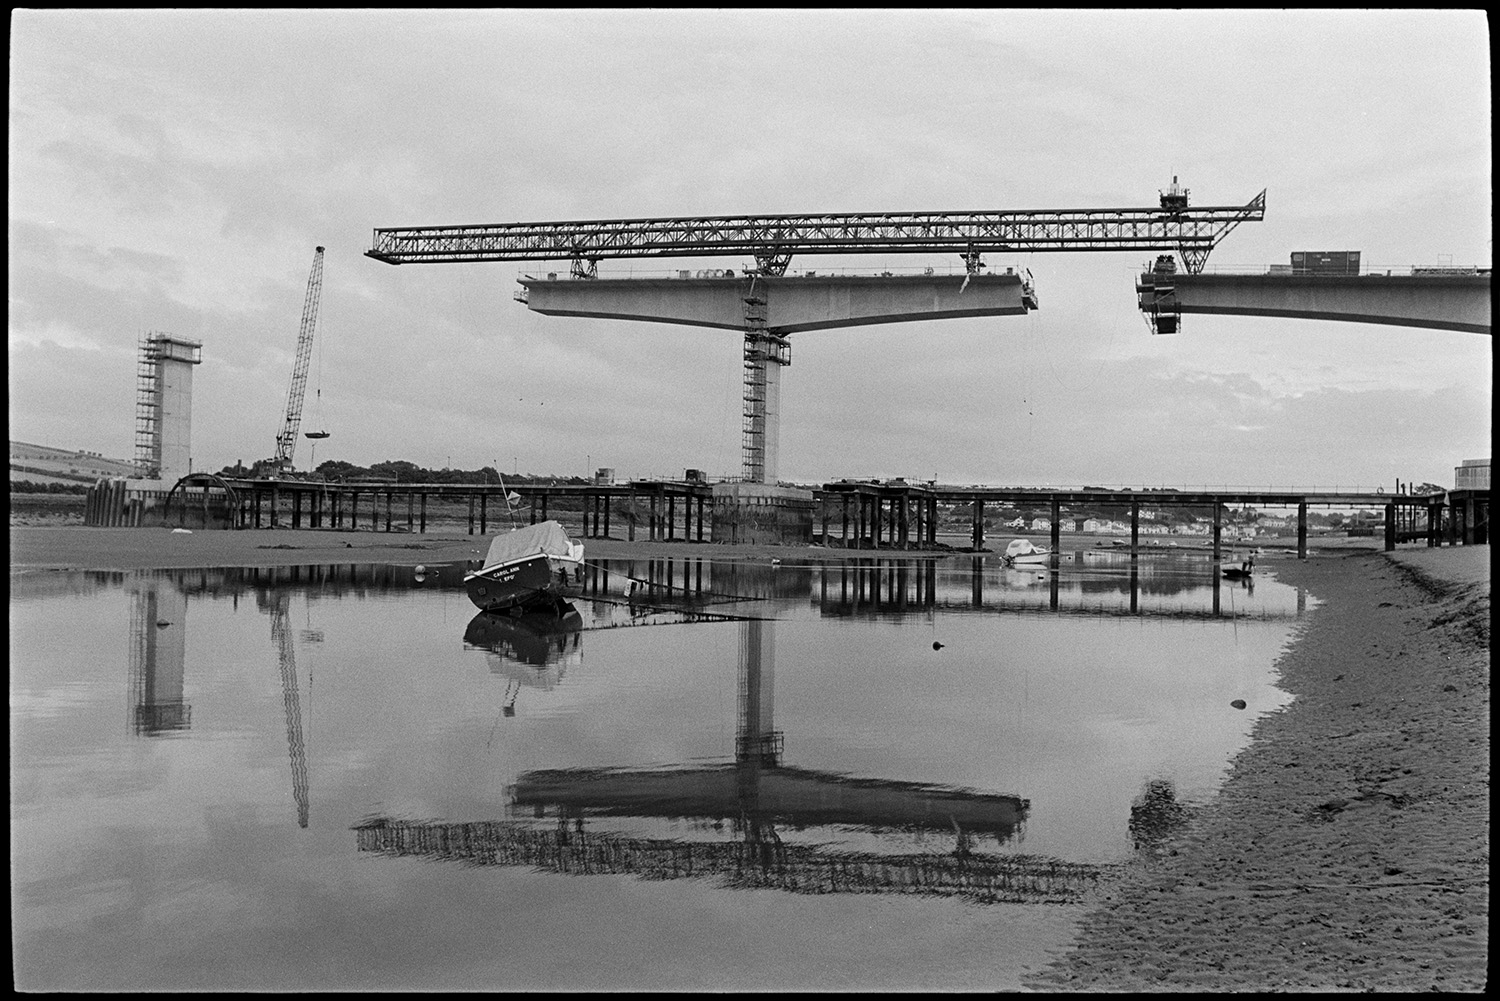 New bridge under construction over river, mudflats with small craft, boats. 
[Cranes constructing Bideford New Bridge across the River Torridge. Small boats can be seen moored on the river in the foreground and reflections of the cranes are visible in the river.]